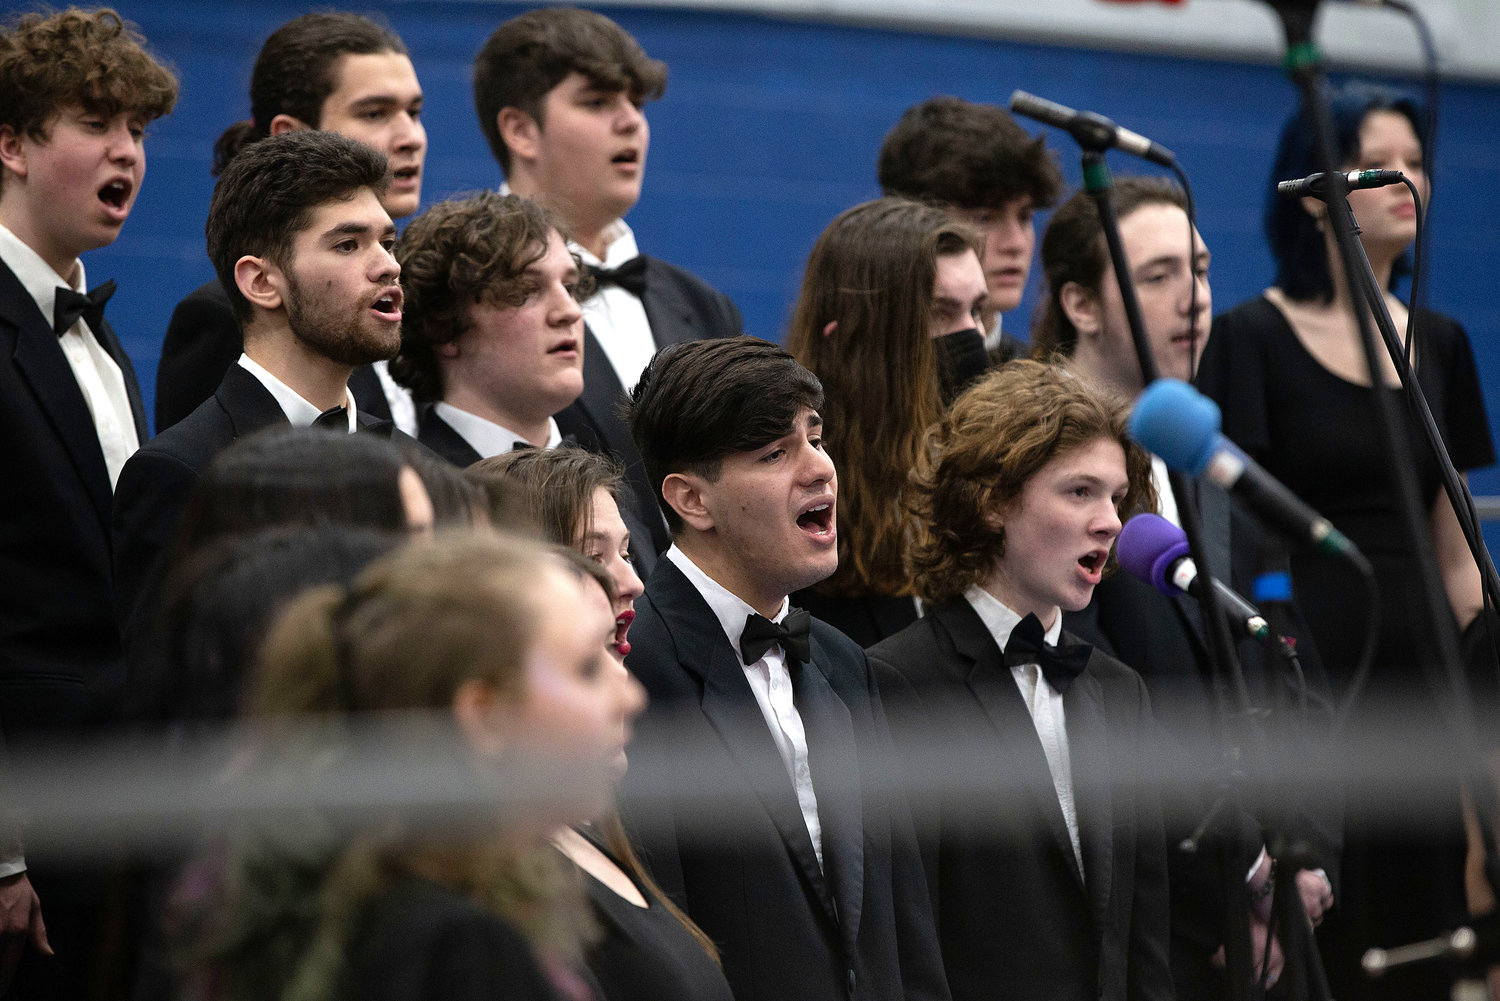 The Mt. Hope High School Chorus and the Vocal Ensemble sing “The Rainbow Connection” and “Here Comes the Sun.”